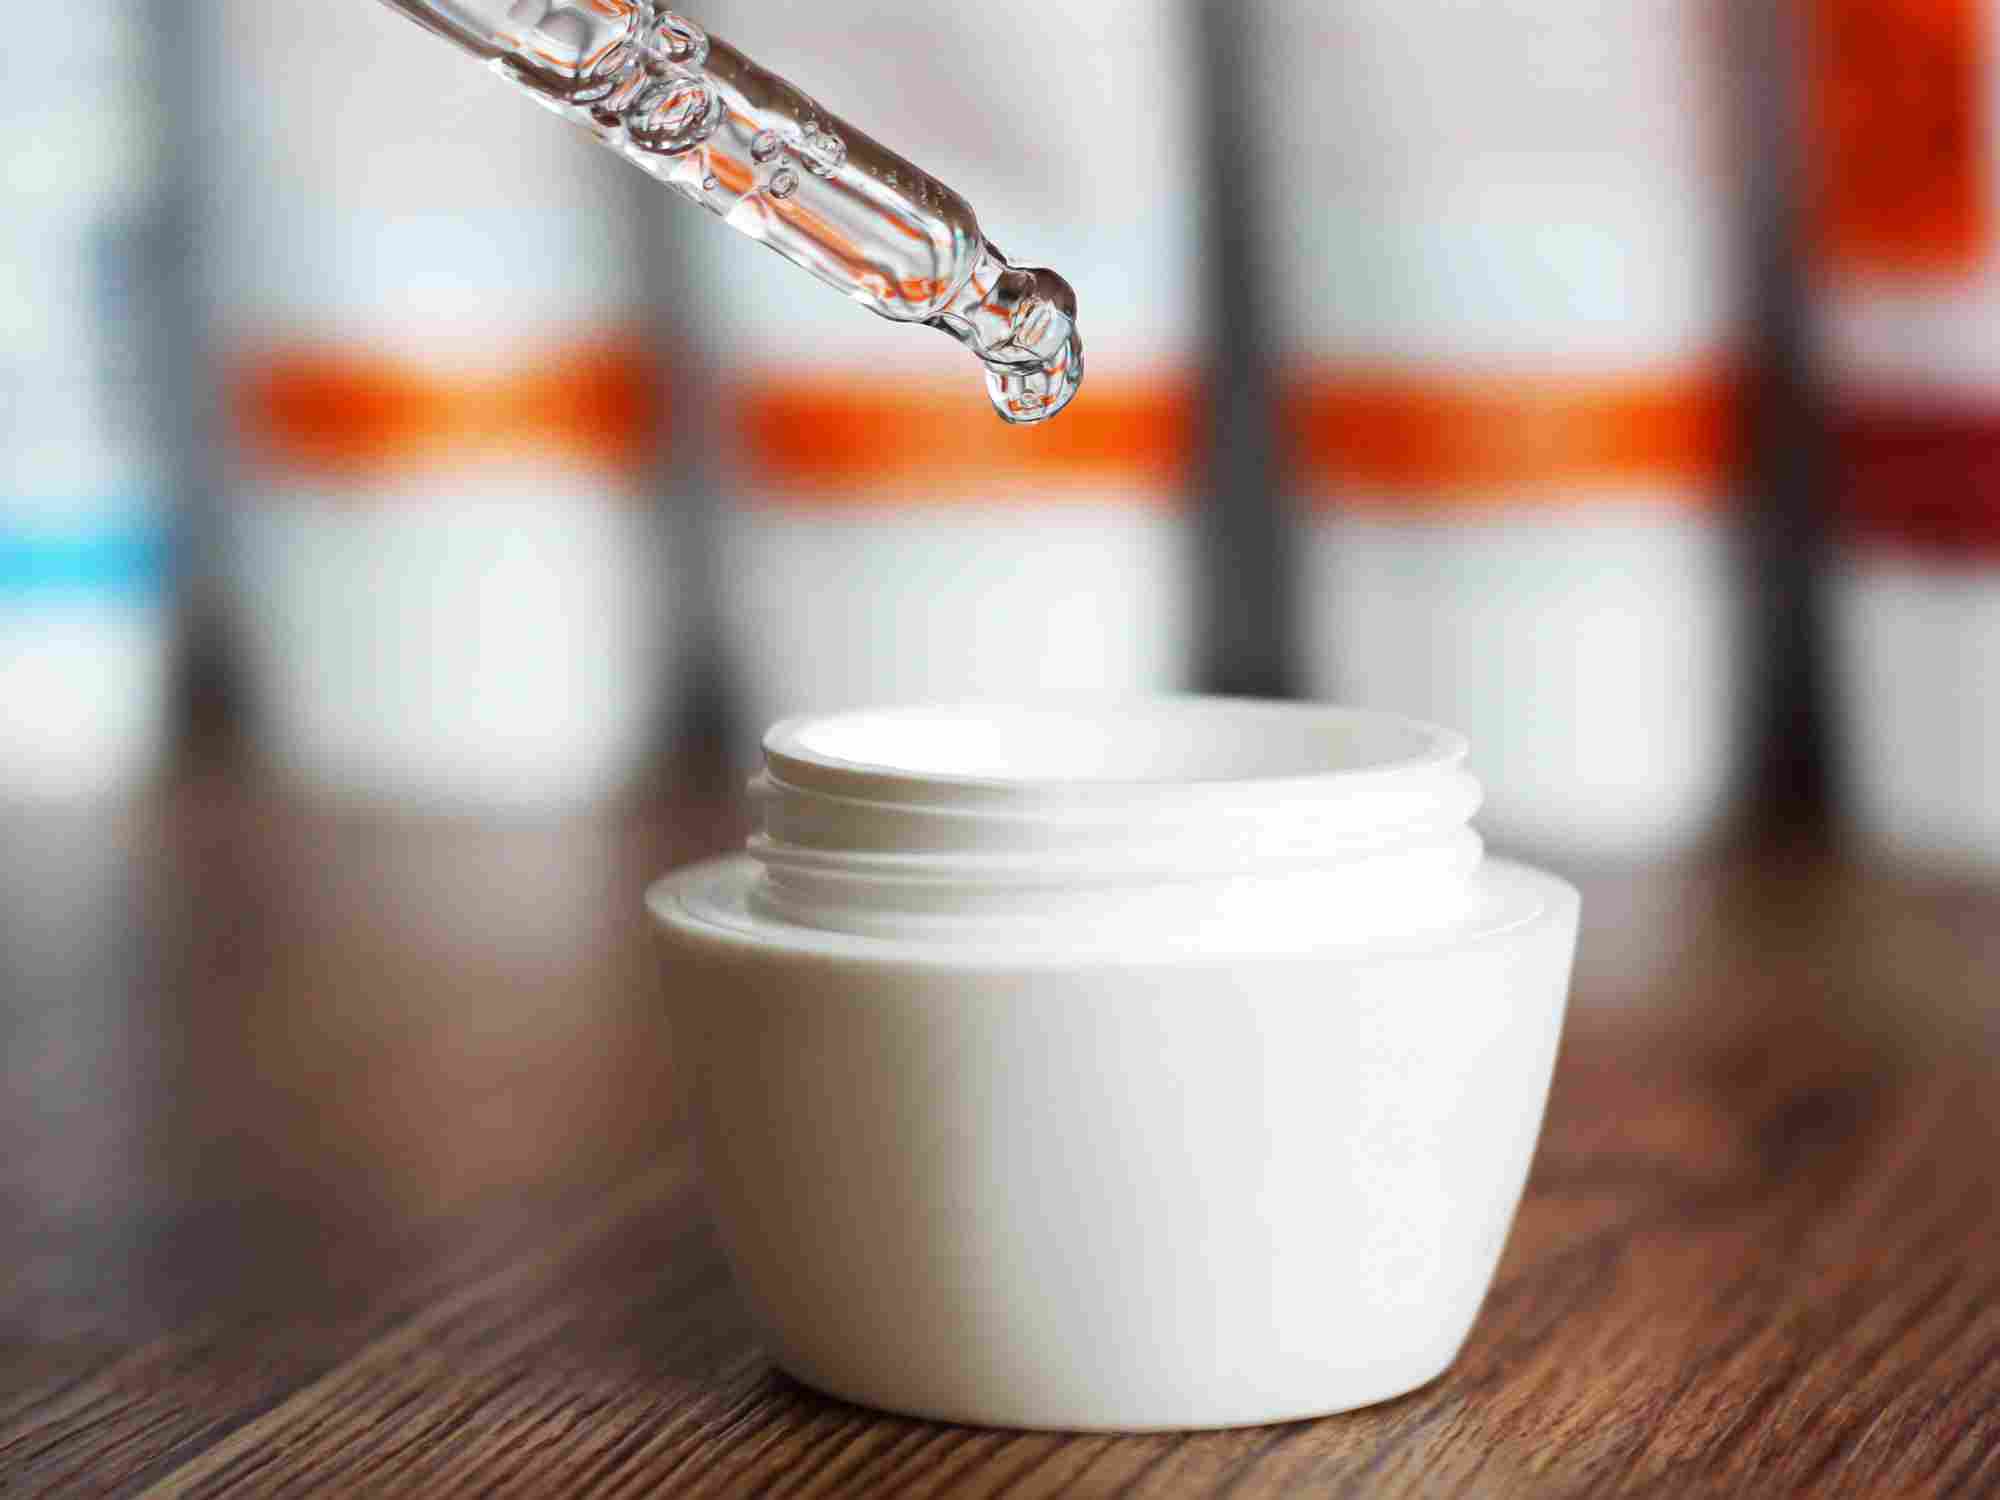 hyaluronic acid in skin care to moisturize recipe how to DIY